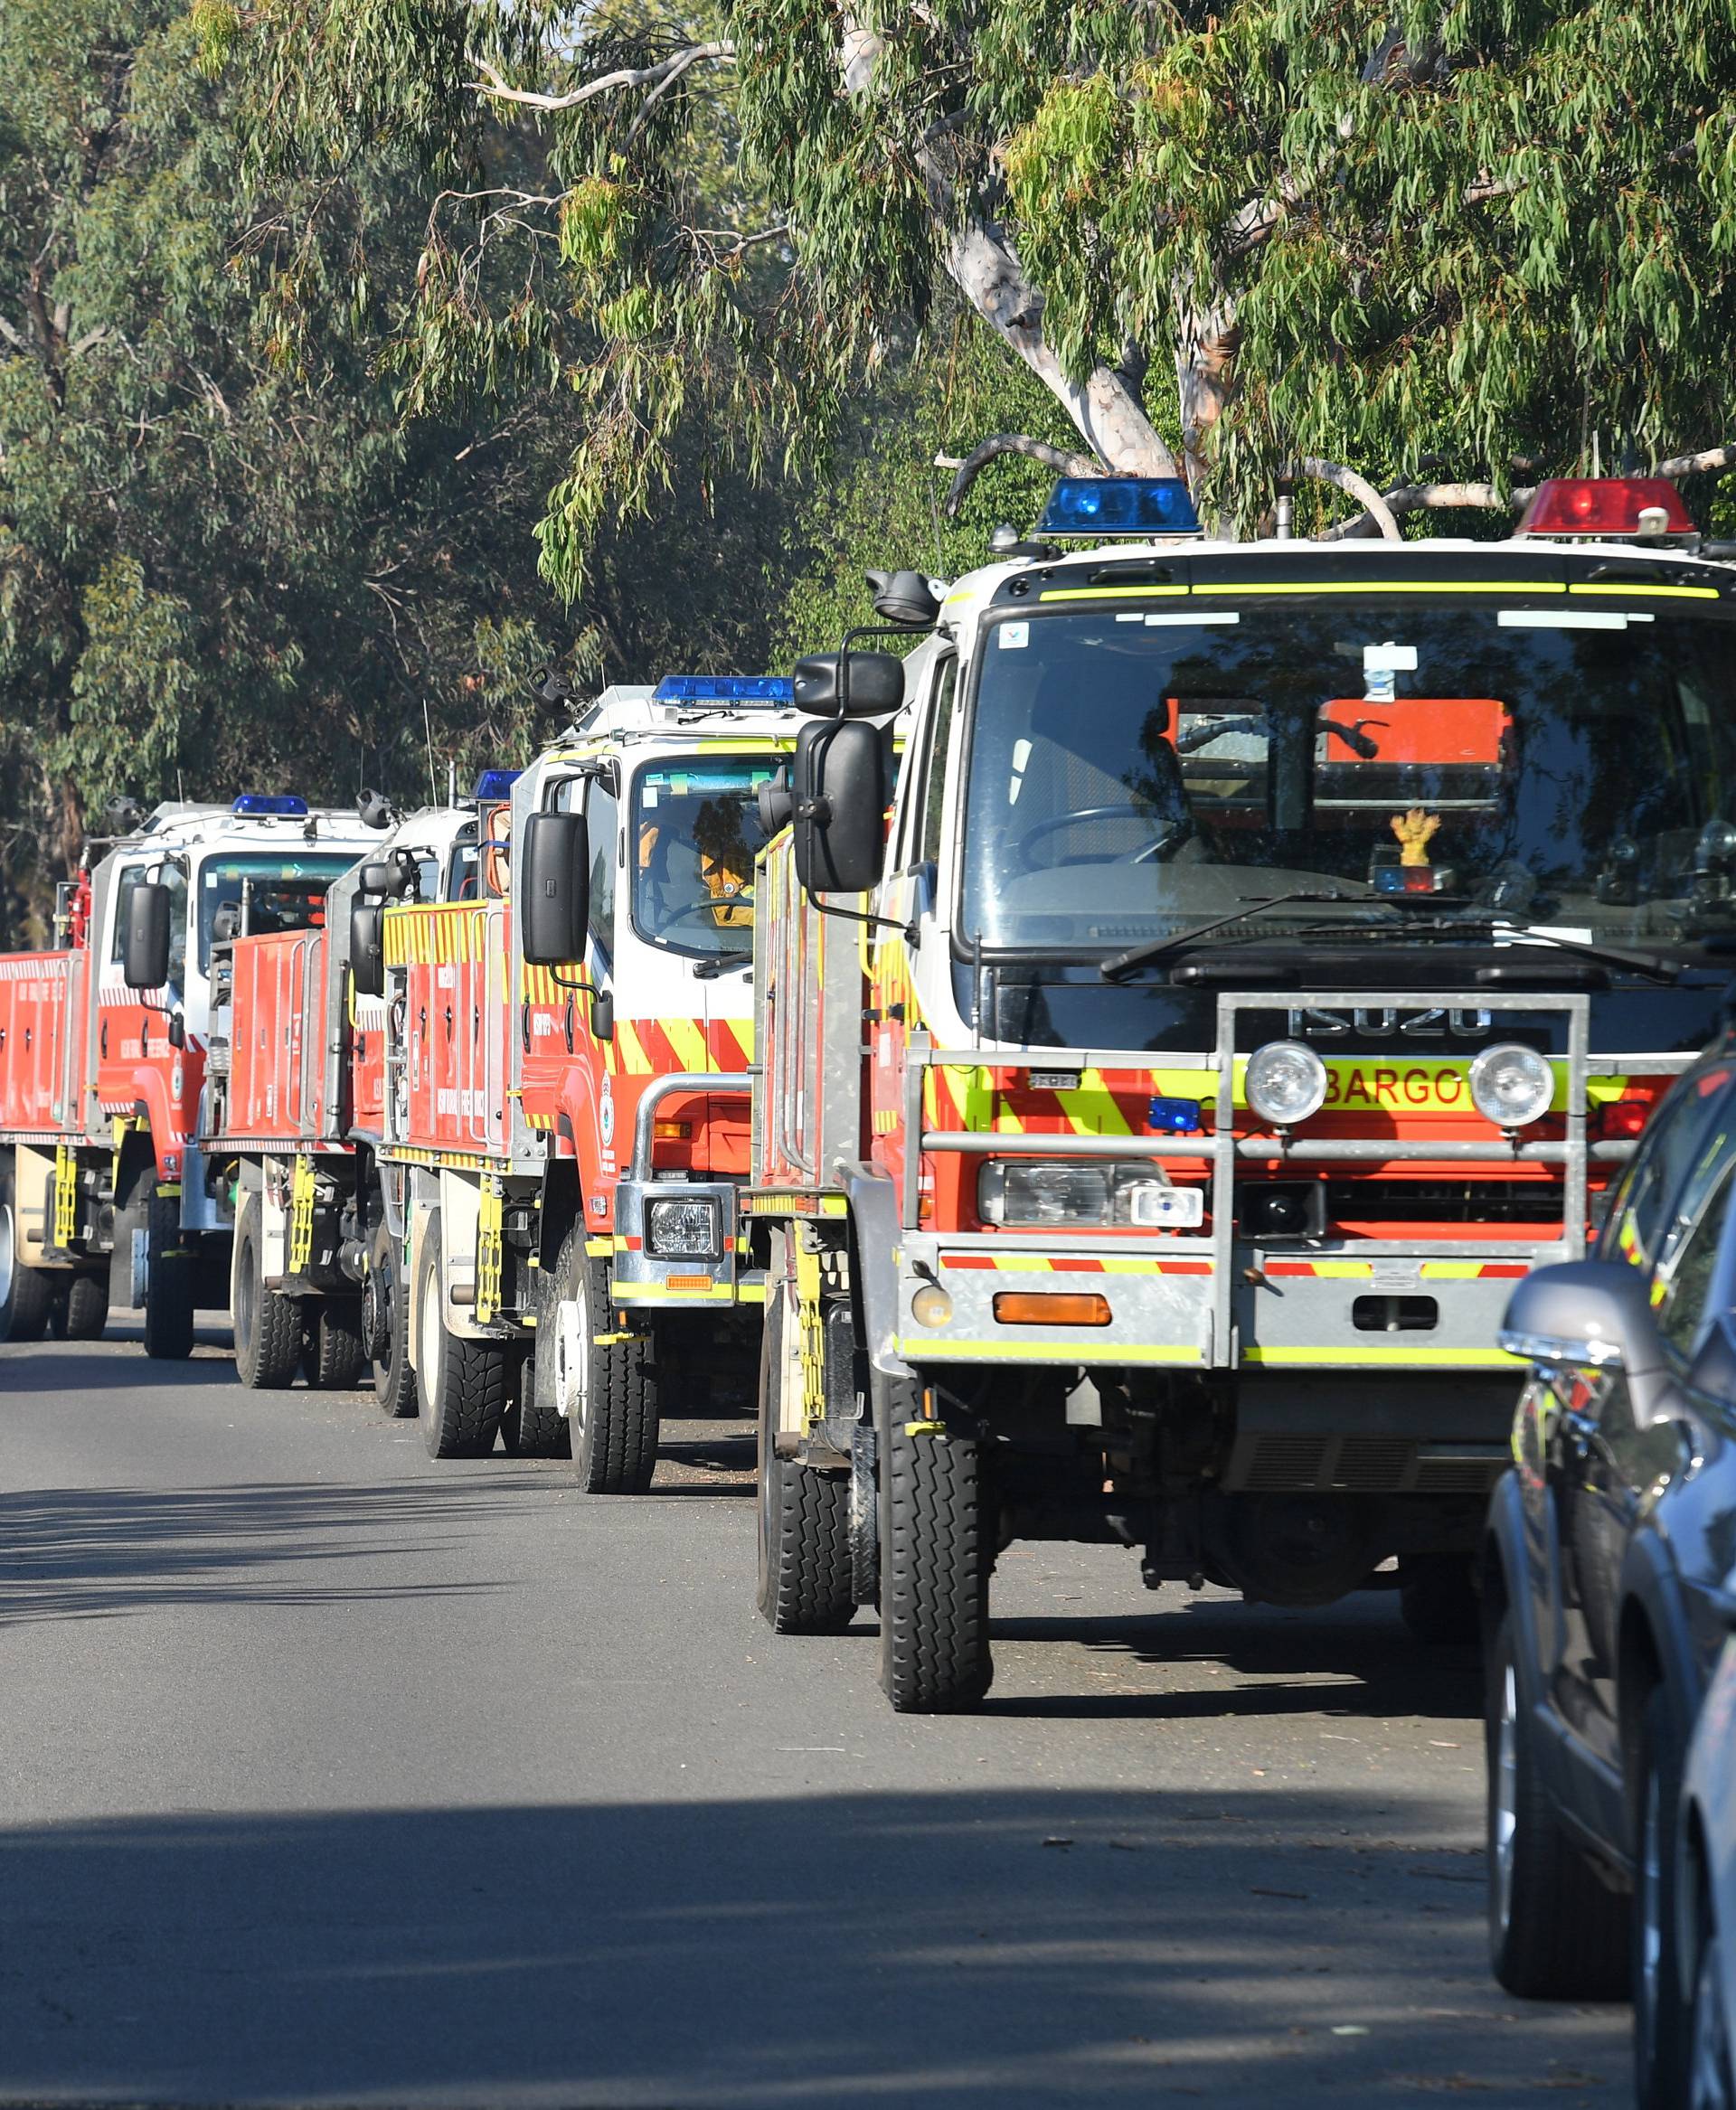 NSW Rural Fire Service trucks as seen on standby at Allison Crescent, Menai in Sydney